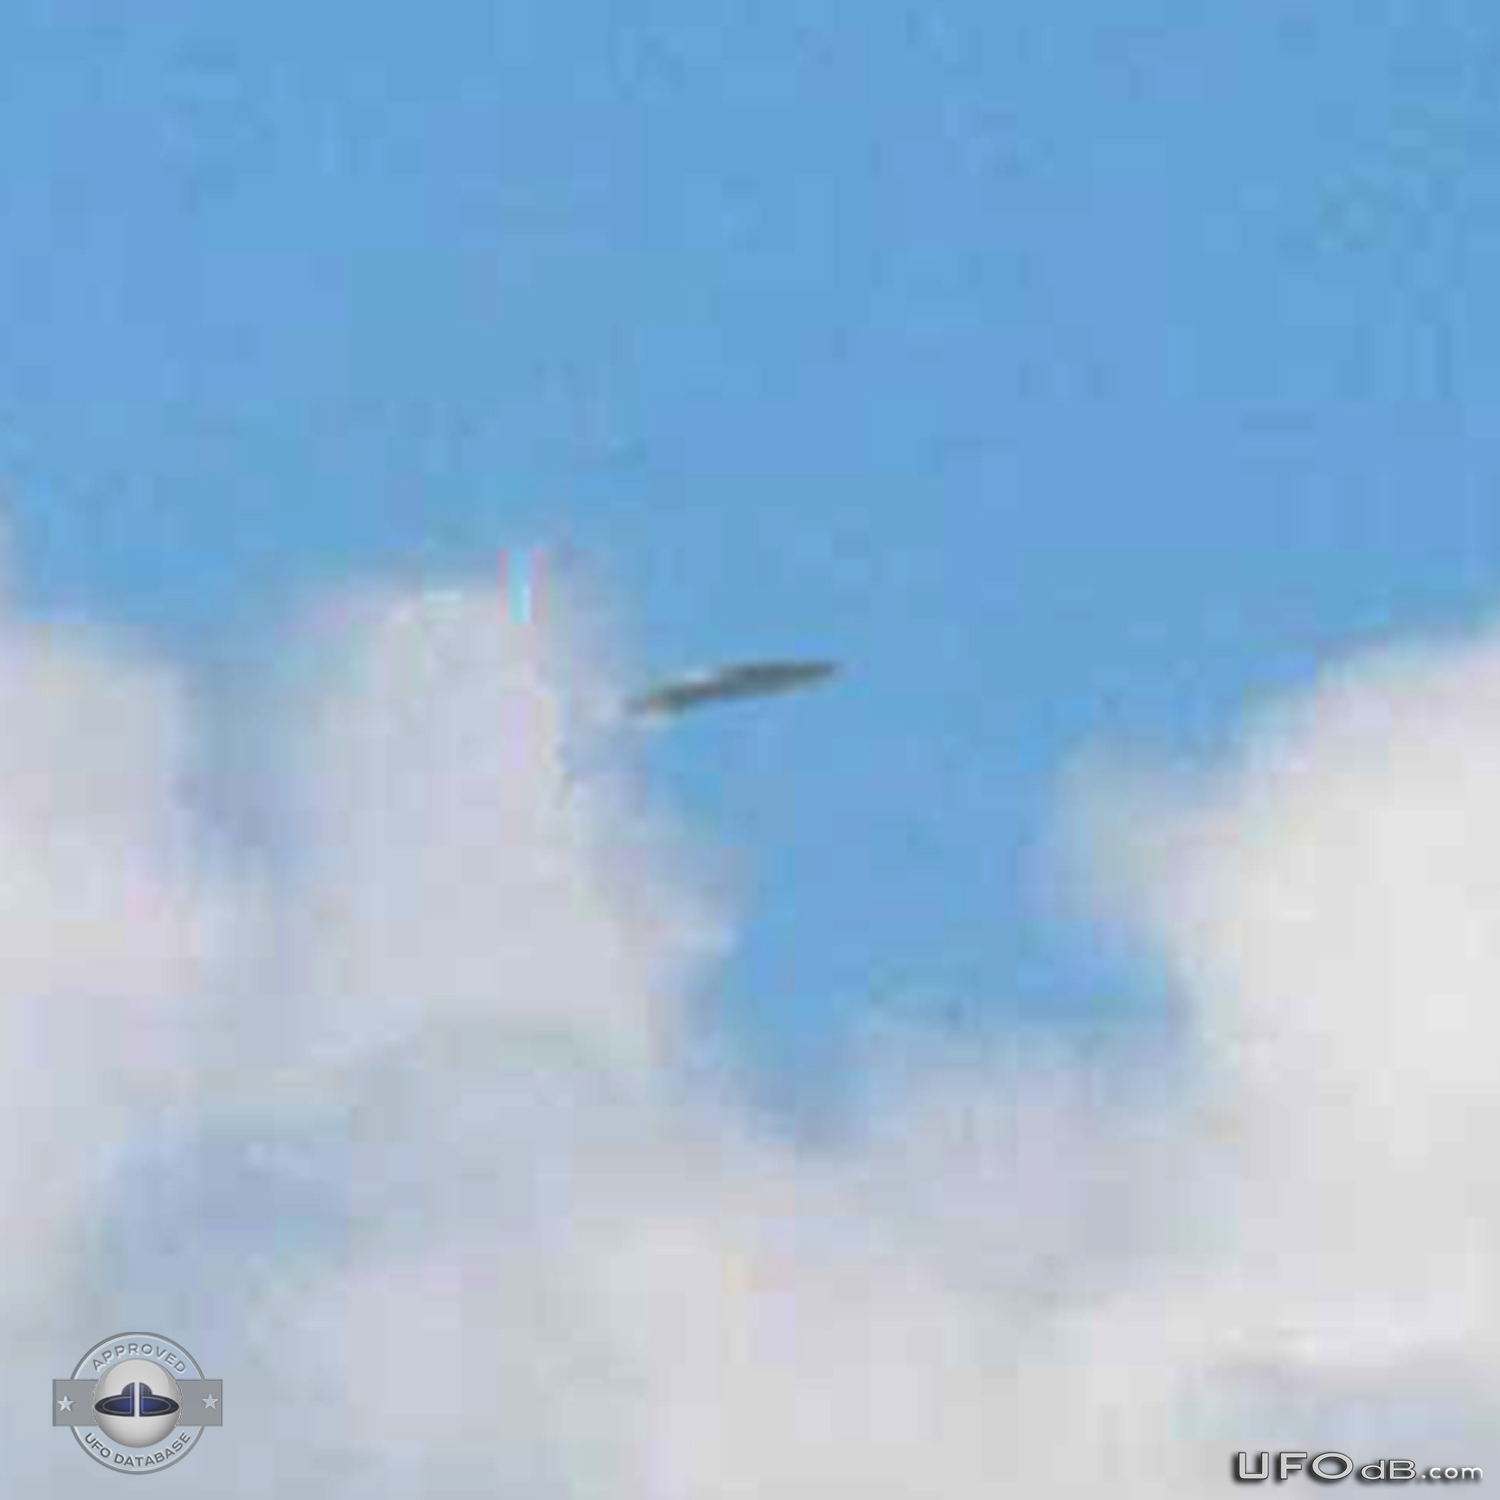 UFO in the distance over Dunoon, Scotland caught on picture in 2010 UFO Picture #398-3